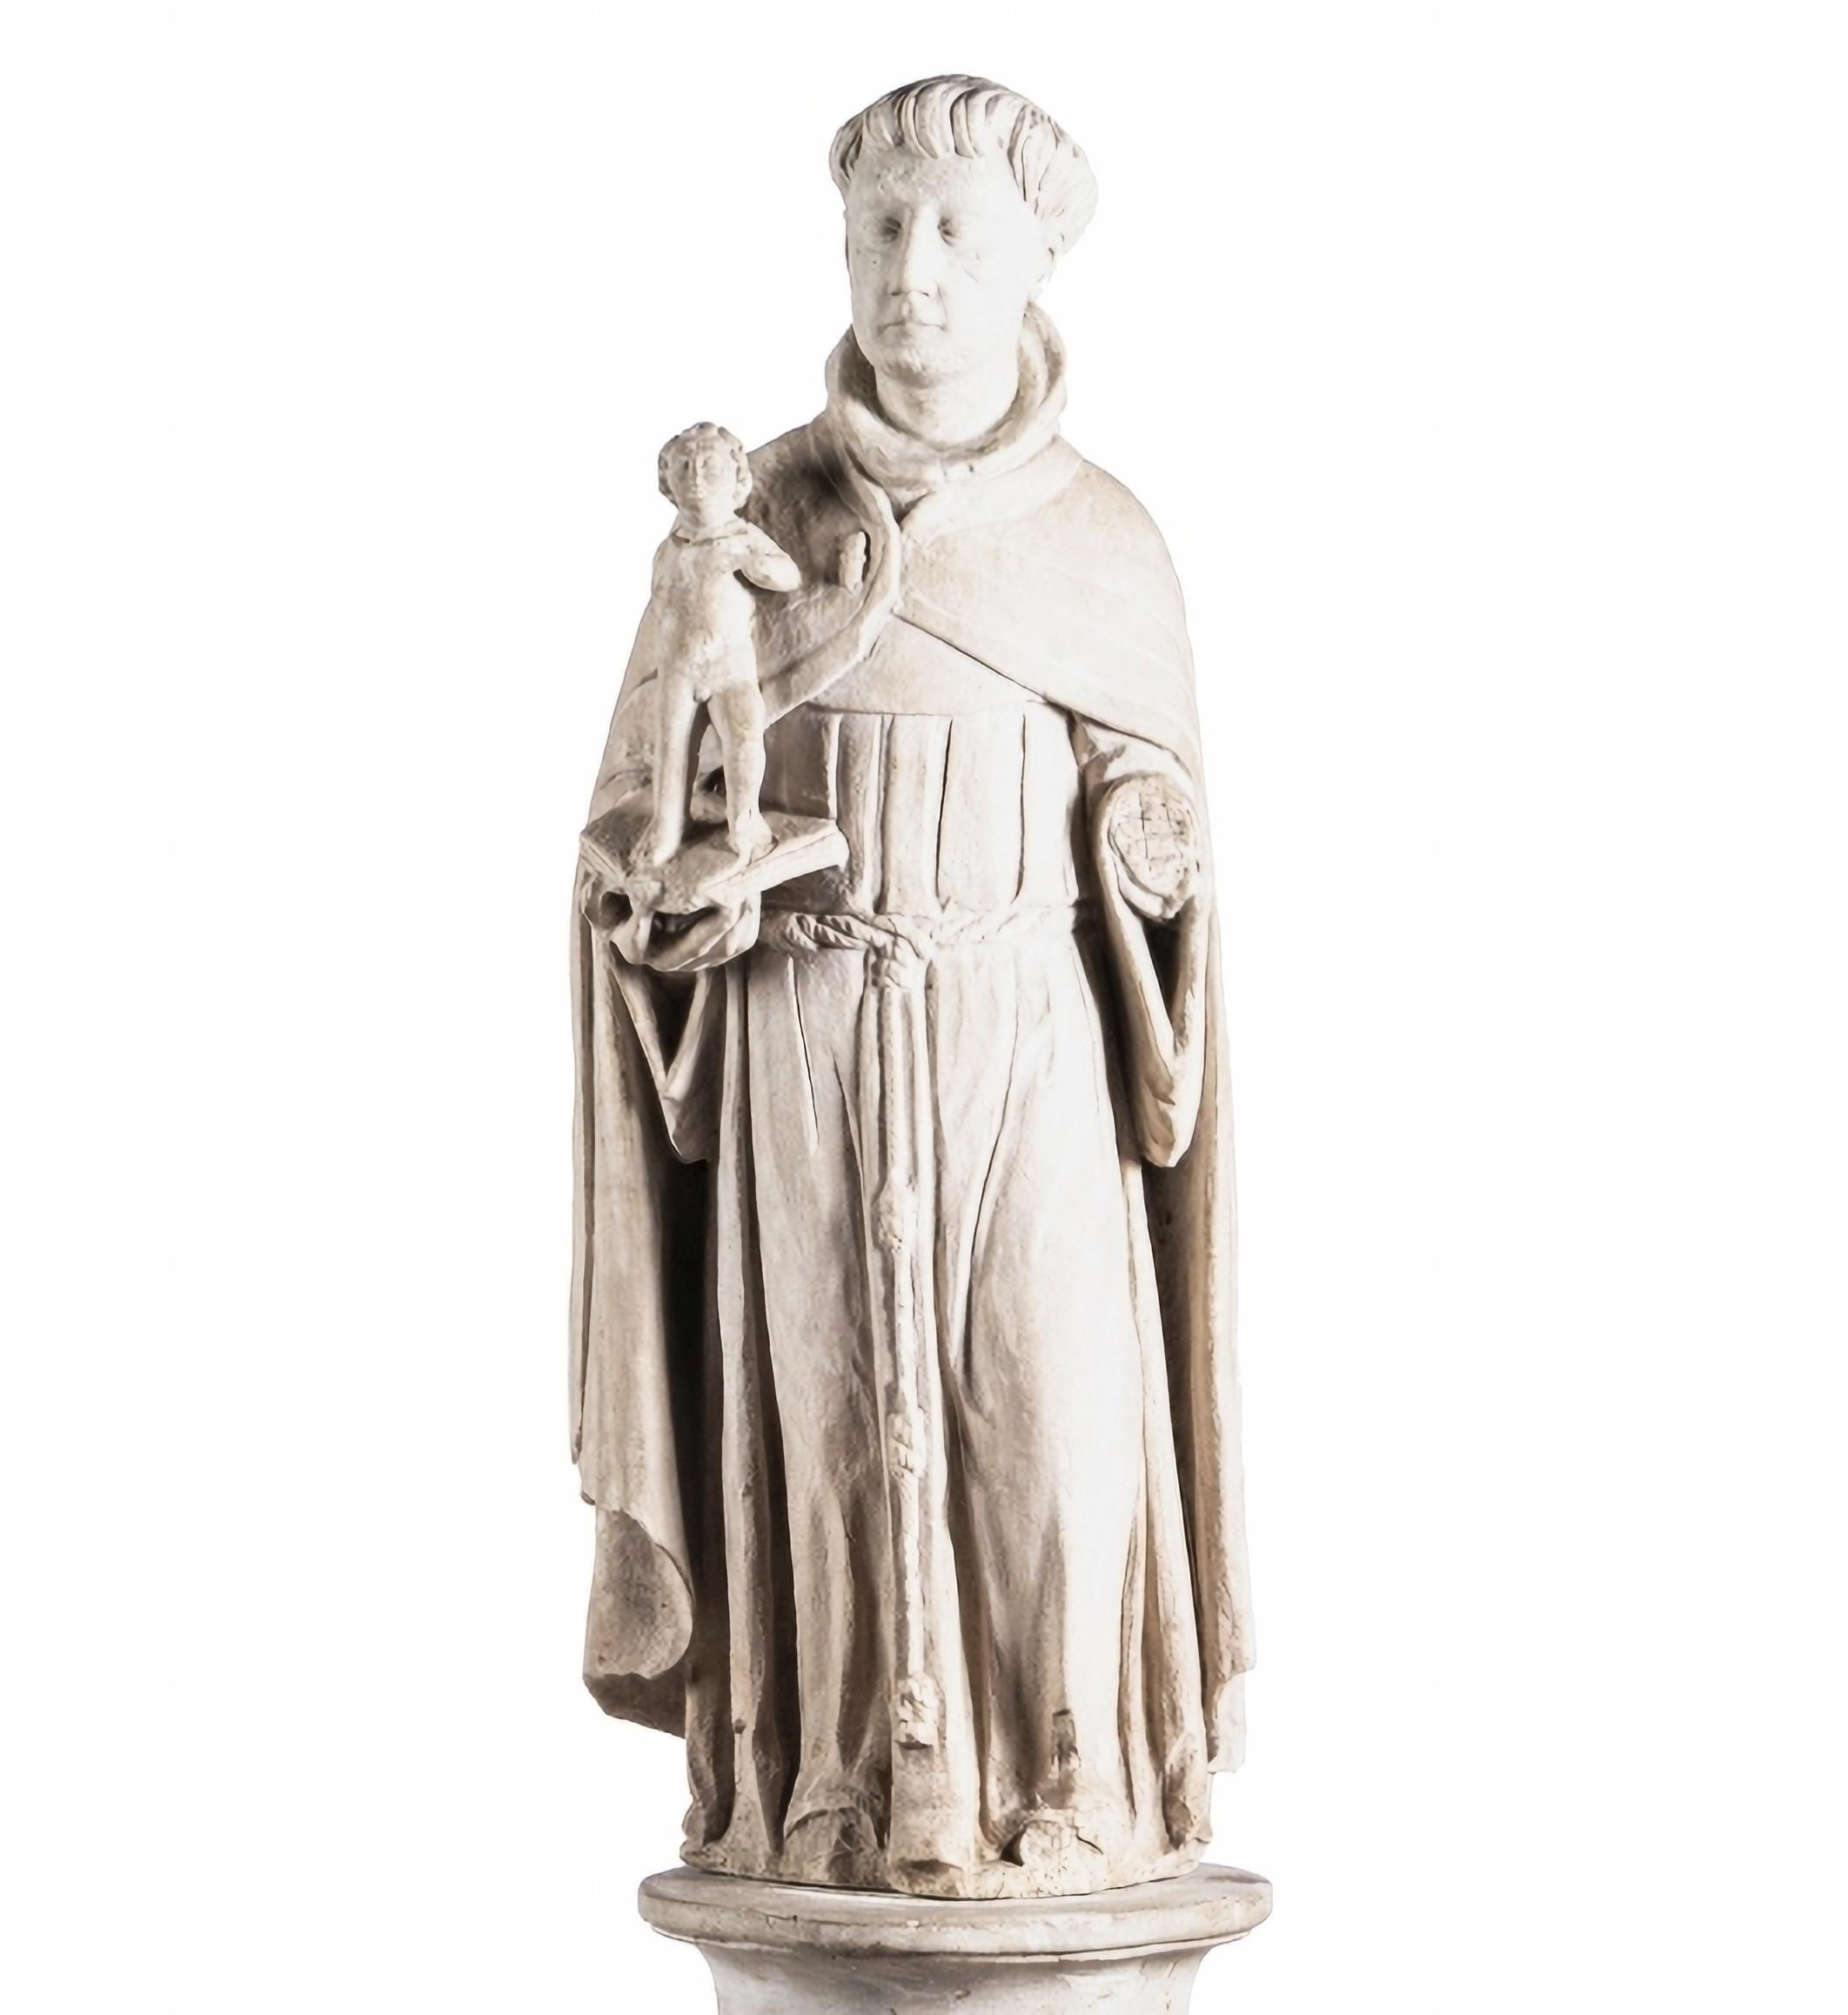 Important Spanish sculpture Saint Anthony with the Child Jesus
of the 18th century
in stone
The figure is shown standing, holding the Baby Jesus
Stands on a posterior plaster column
Measure: Height: (sculpture) 76 cm.;
(total) 164 cm.